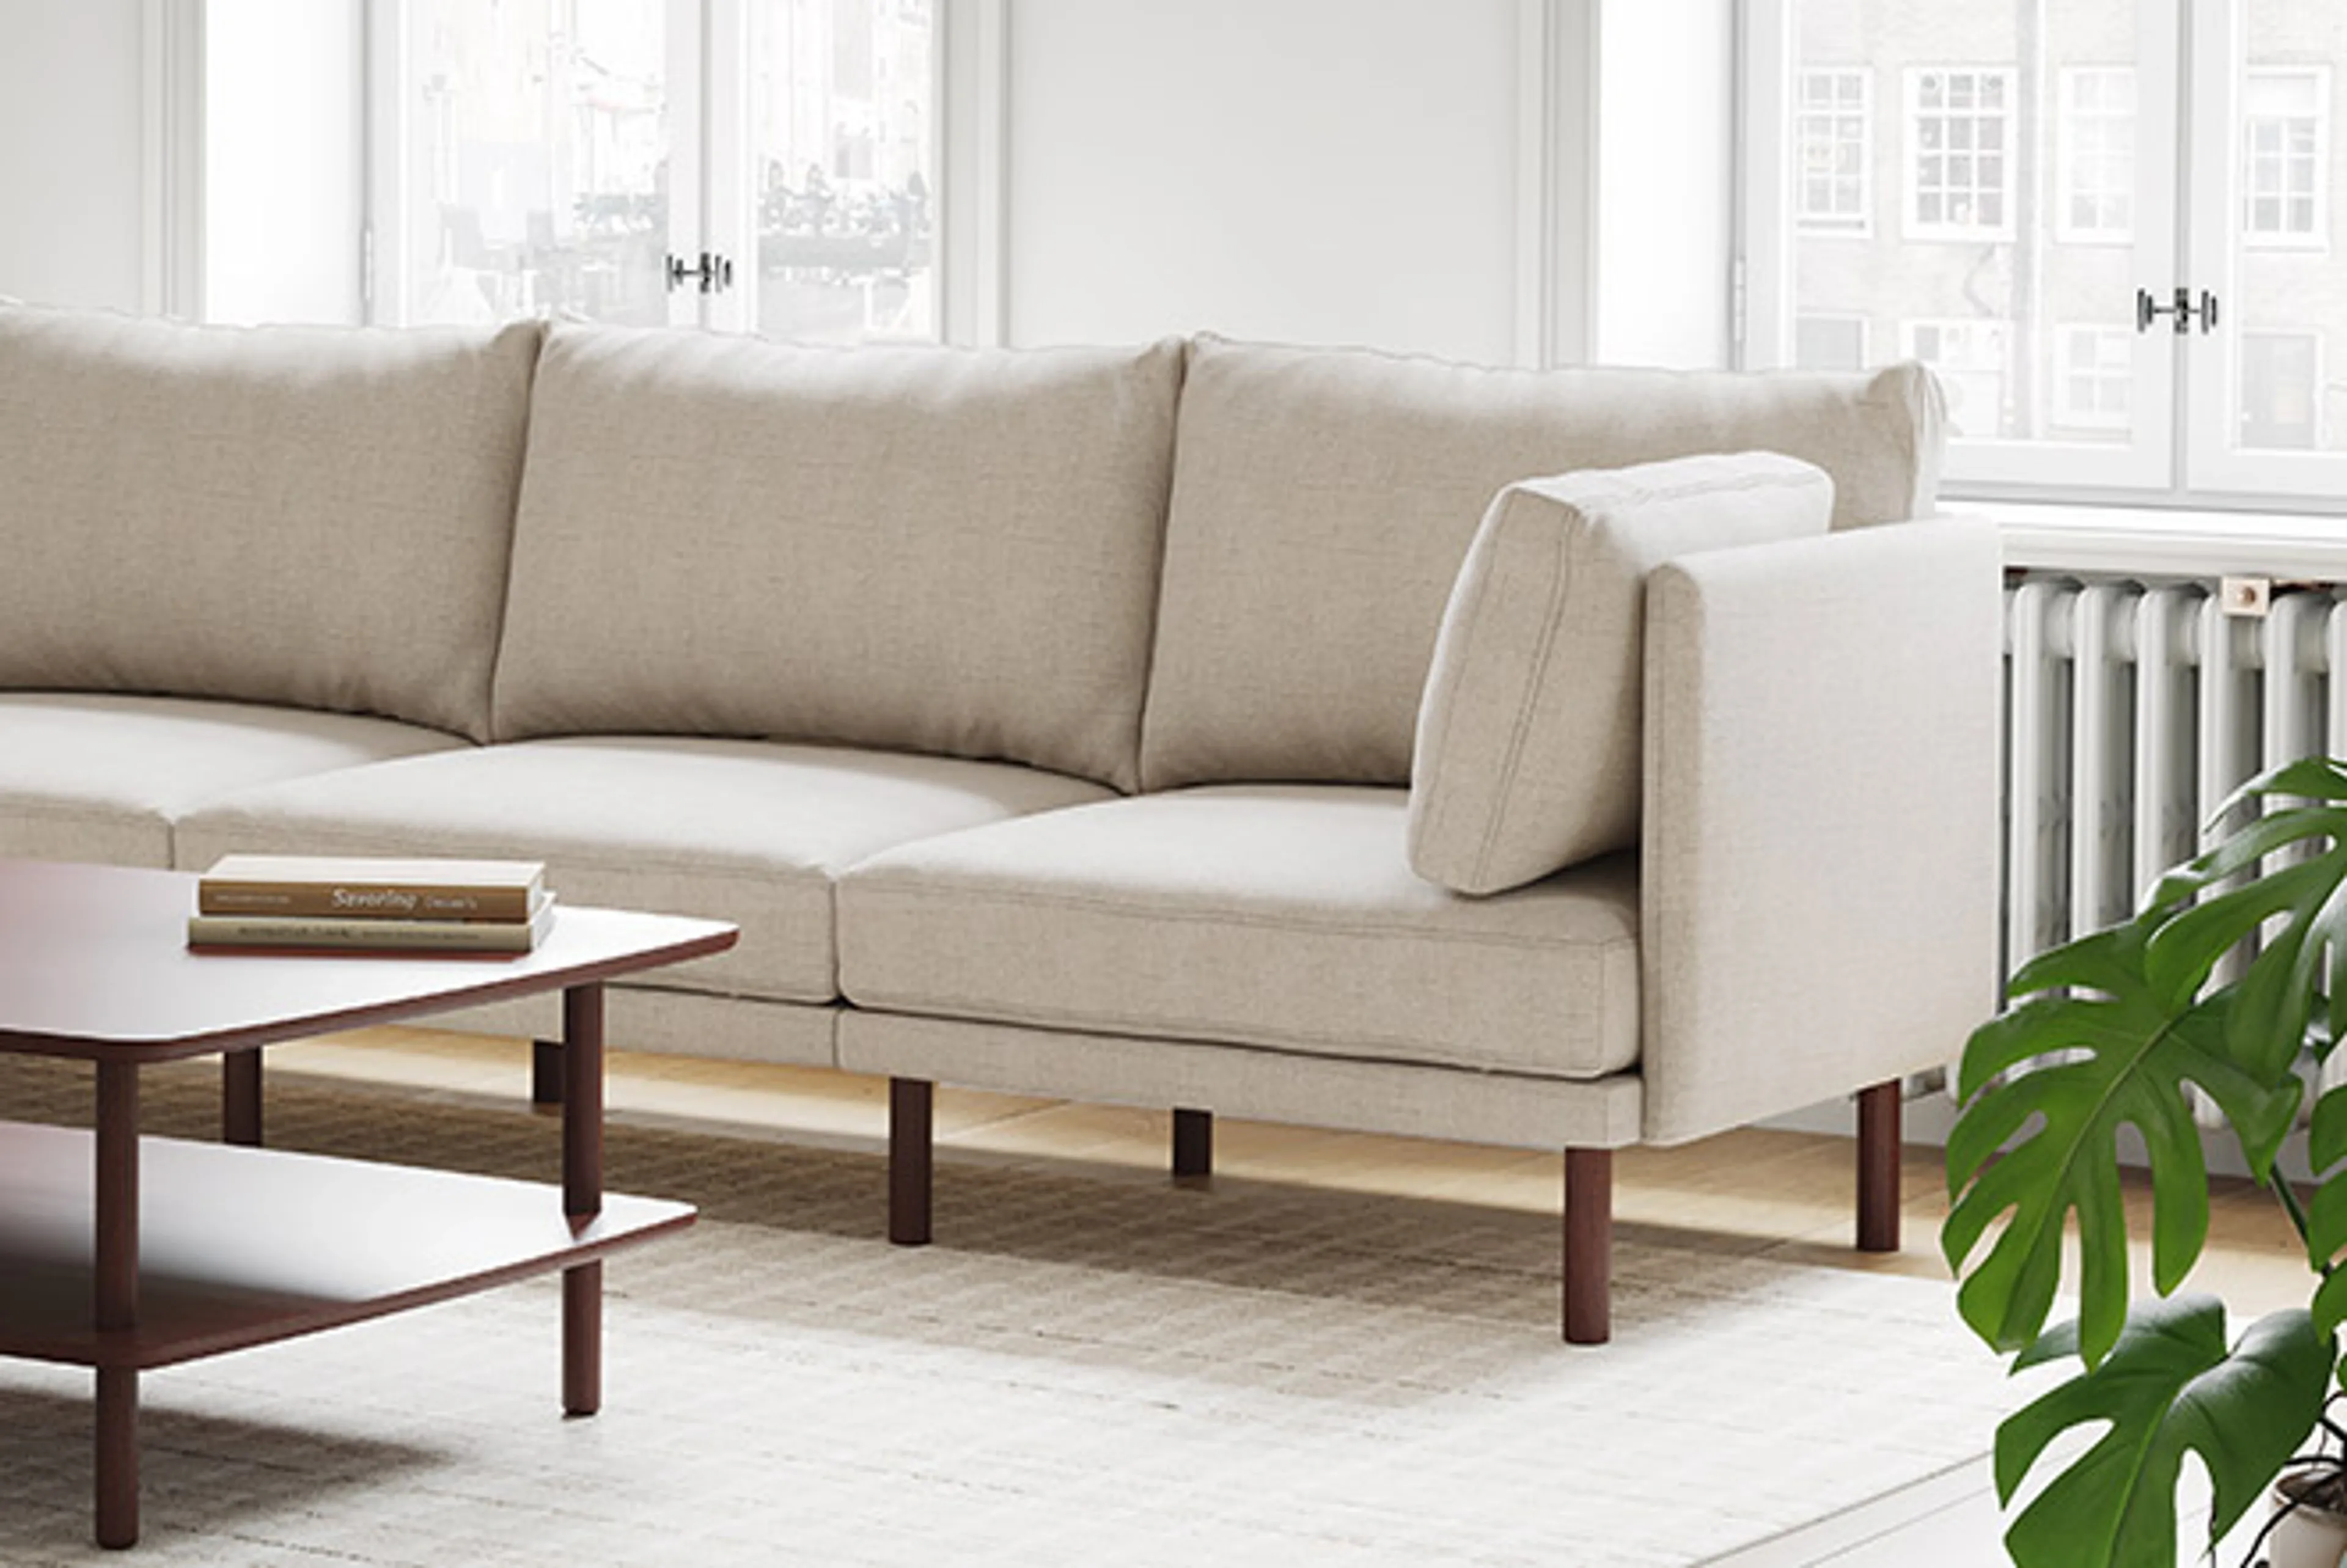 Field sofa in oatmeal with walnut legs shown in living room setting with rug and coffee table.